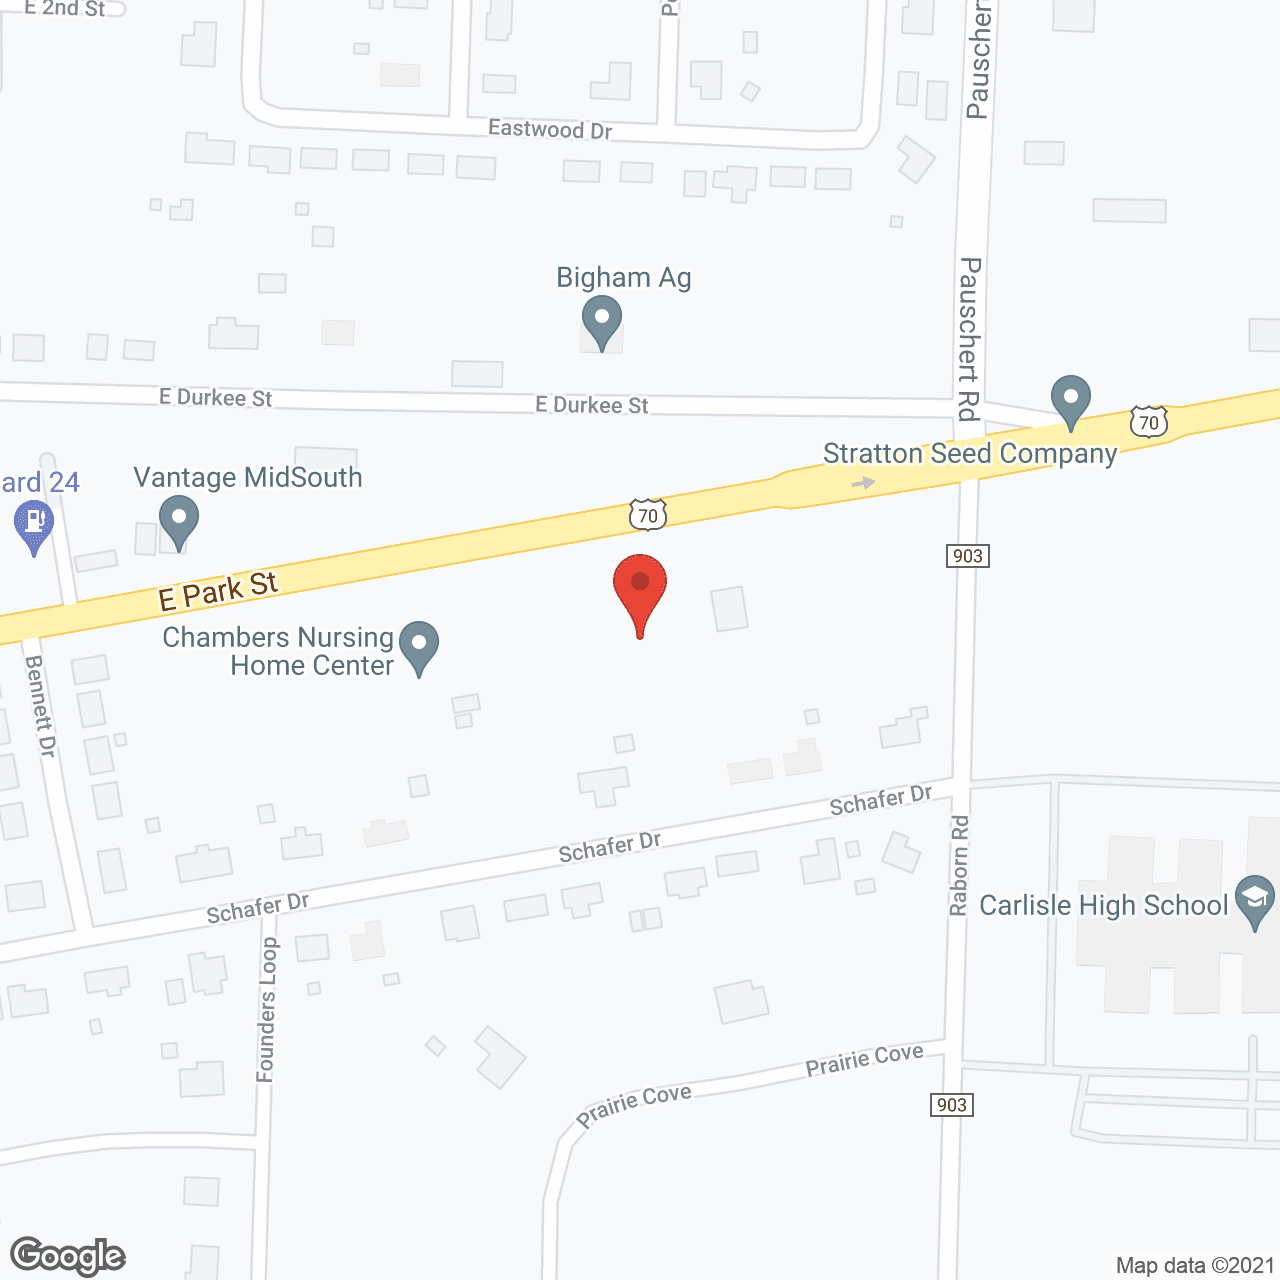 Chambers Nursing Home Ctr in google map